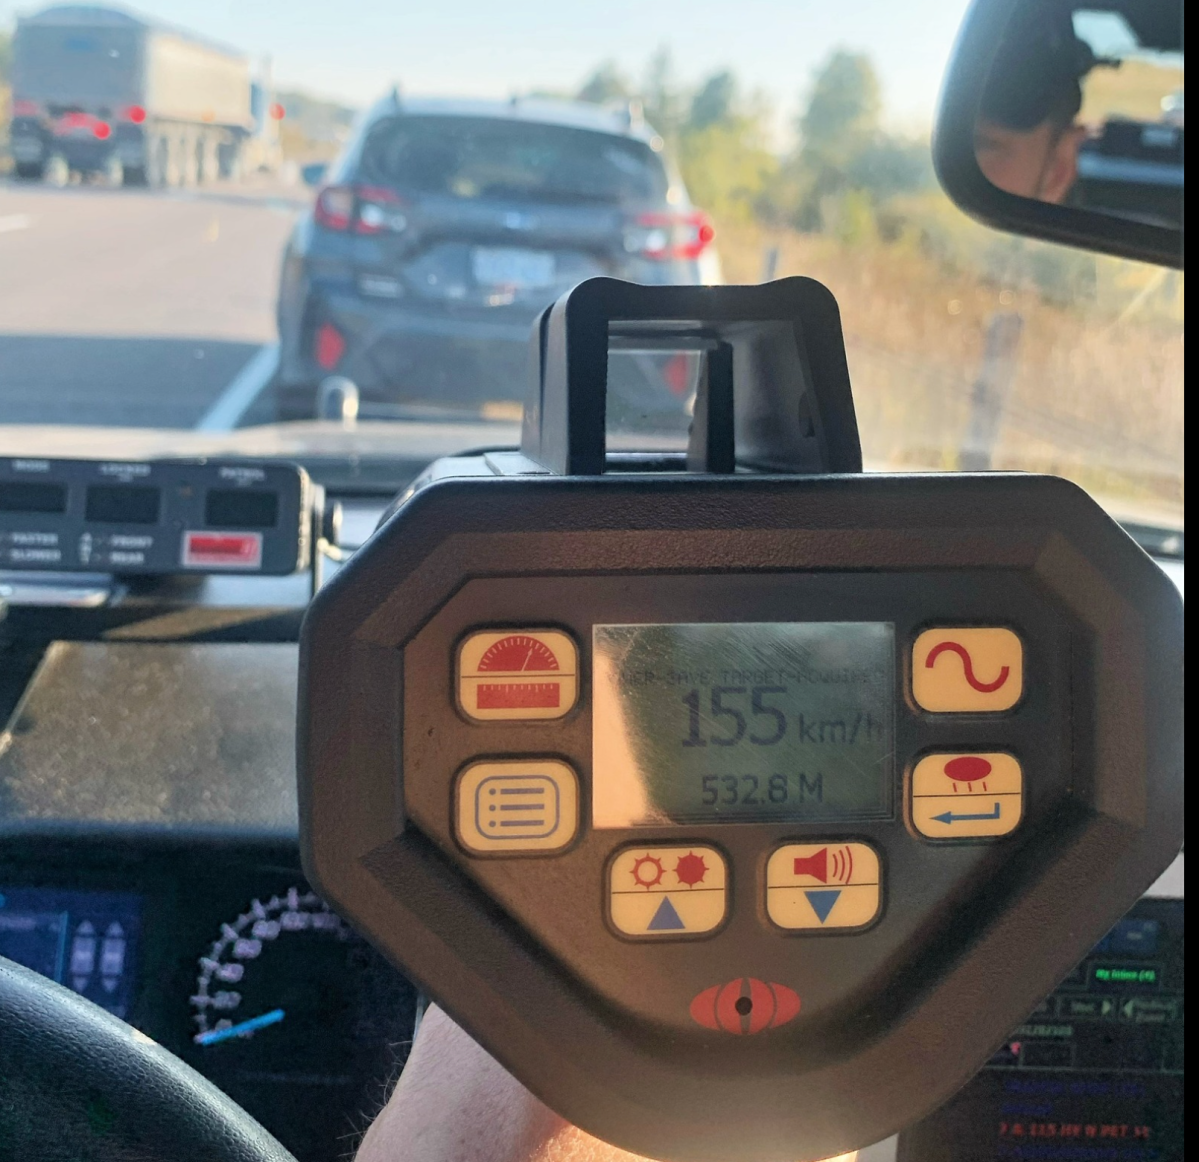 Peterboough County OPP clocked a vehicle travelling 155 km/h in a posted 100 km/h zone on Hwy. 115 on Sept. 21, 2023.